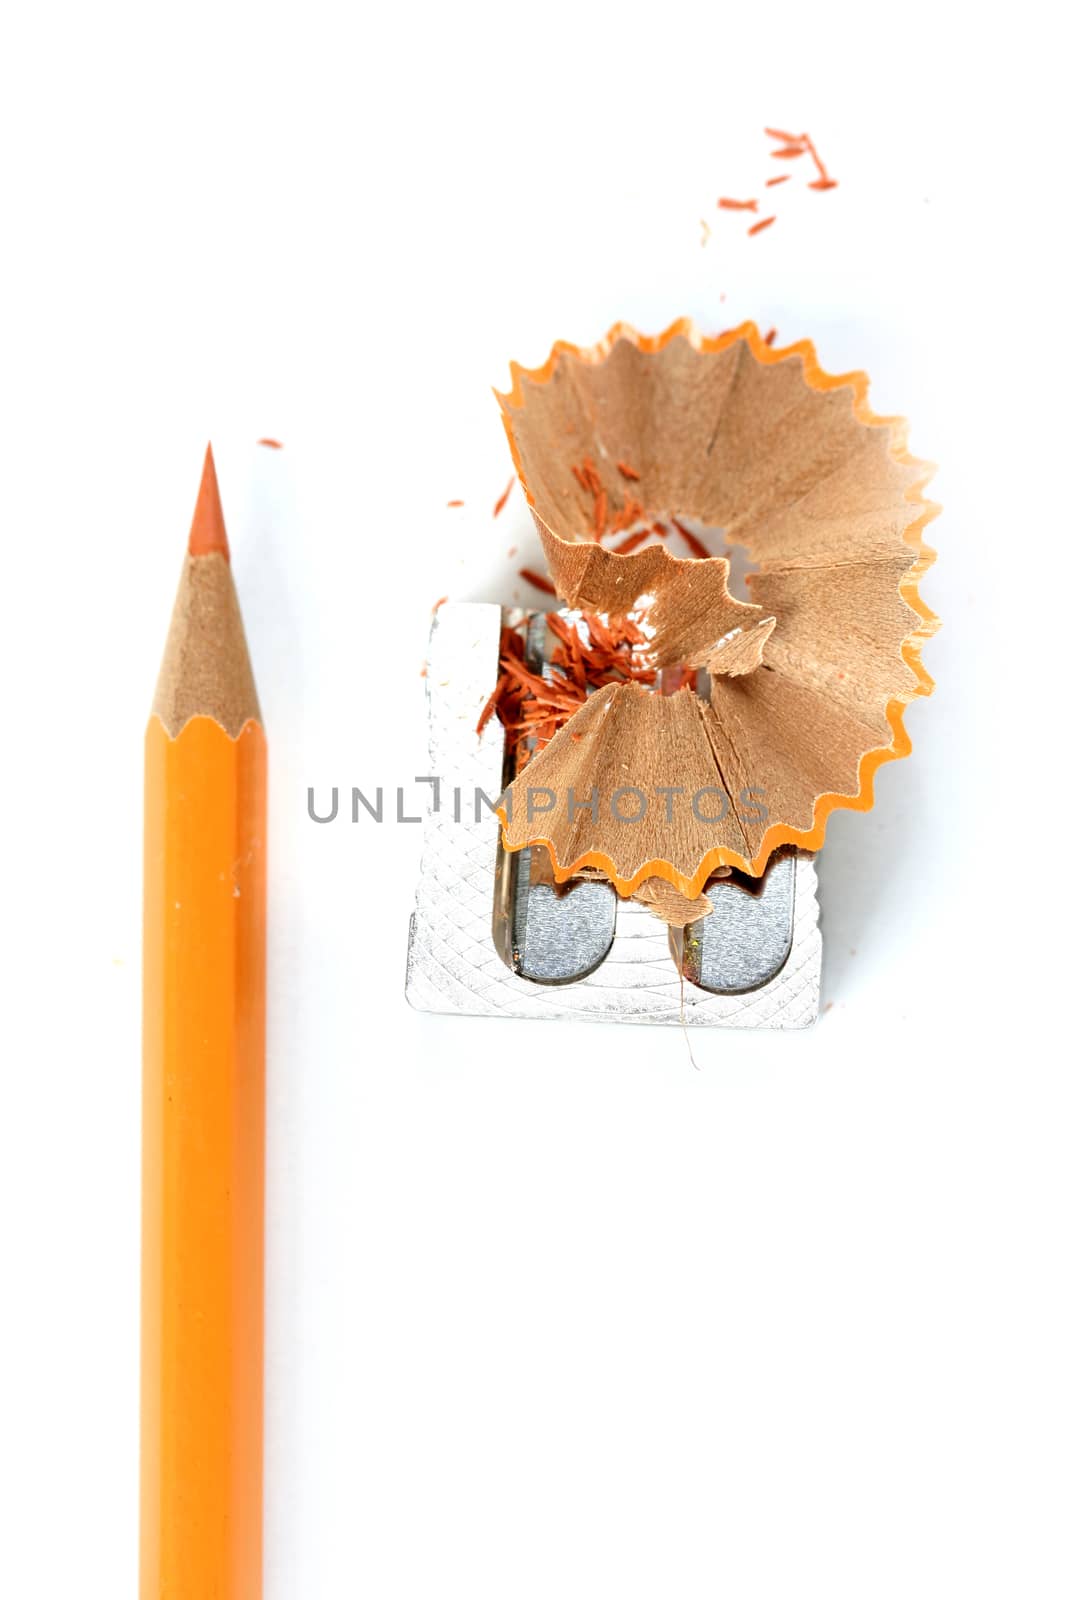 Pencil and sharpener by arosoft